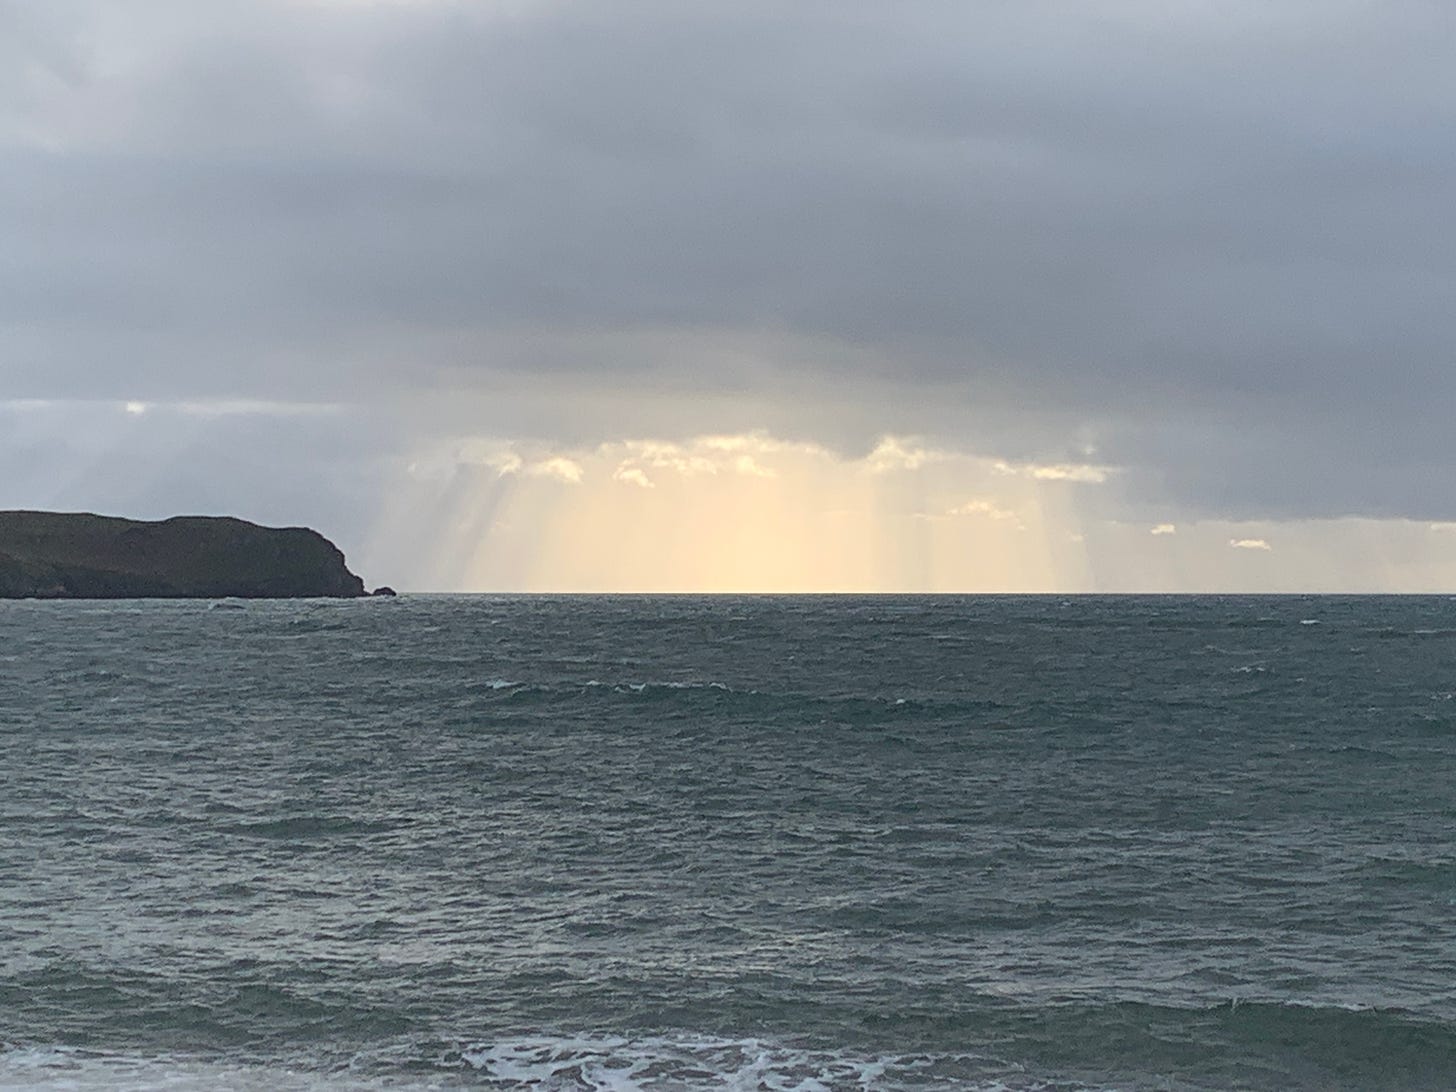 Ocean, with grey skies and a breakthrough column of bright sunlight through the clouds. A headland is visible to the left